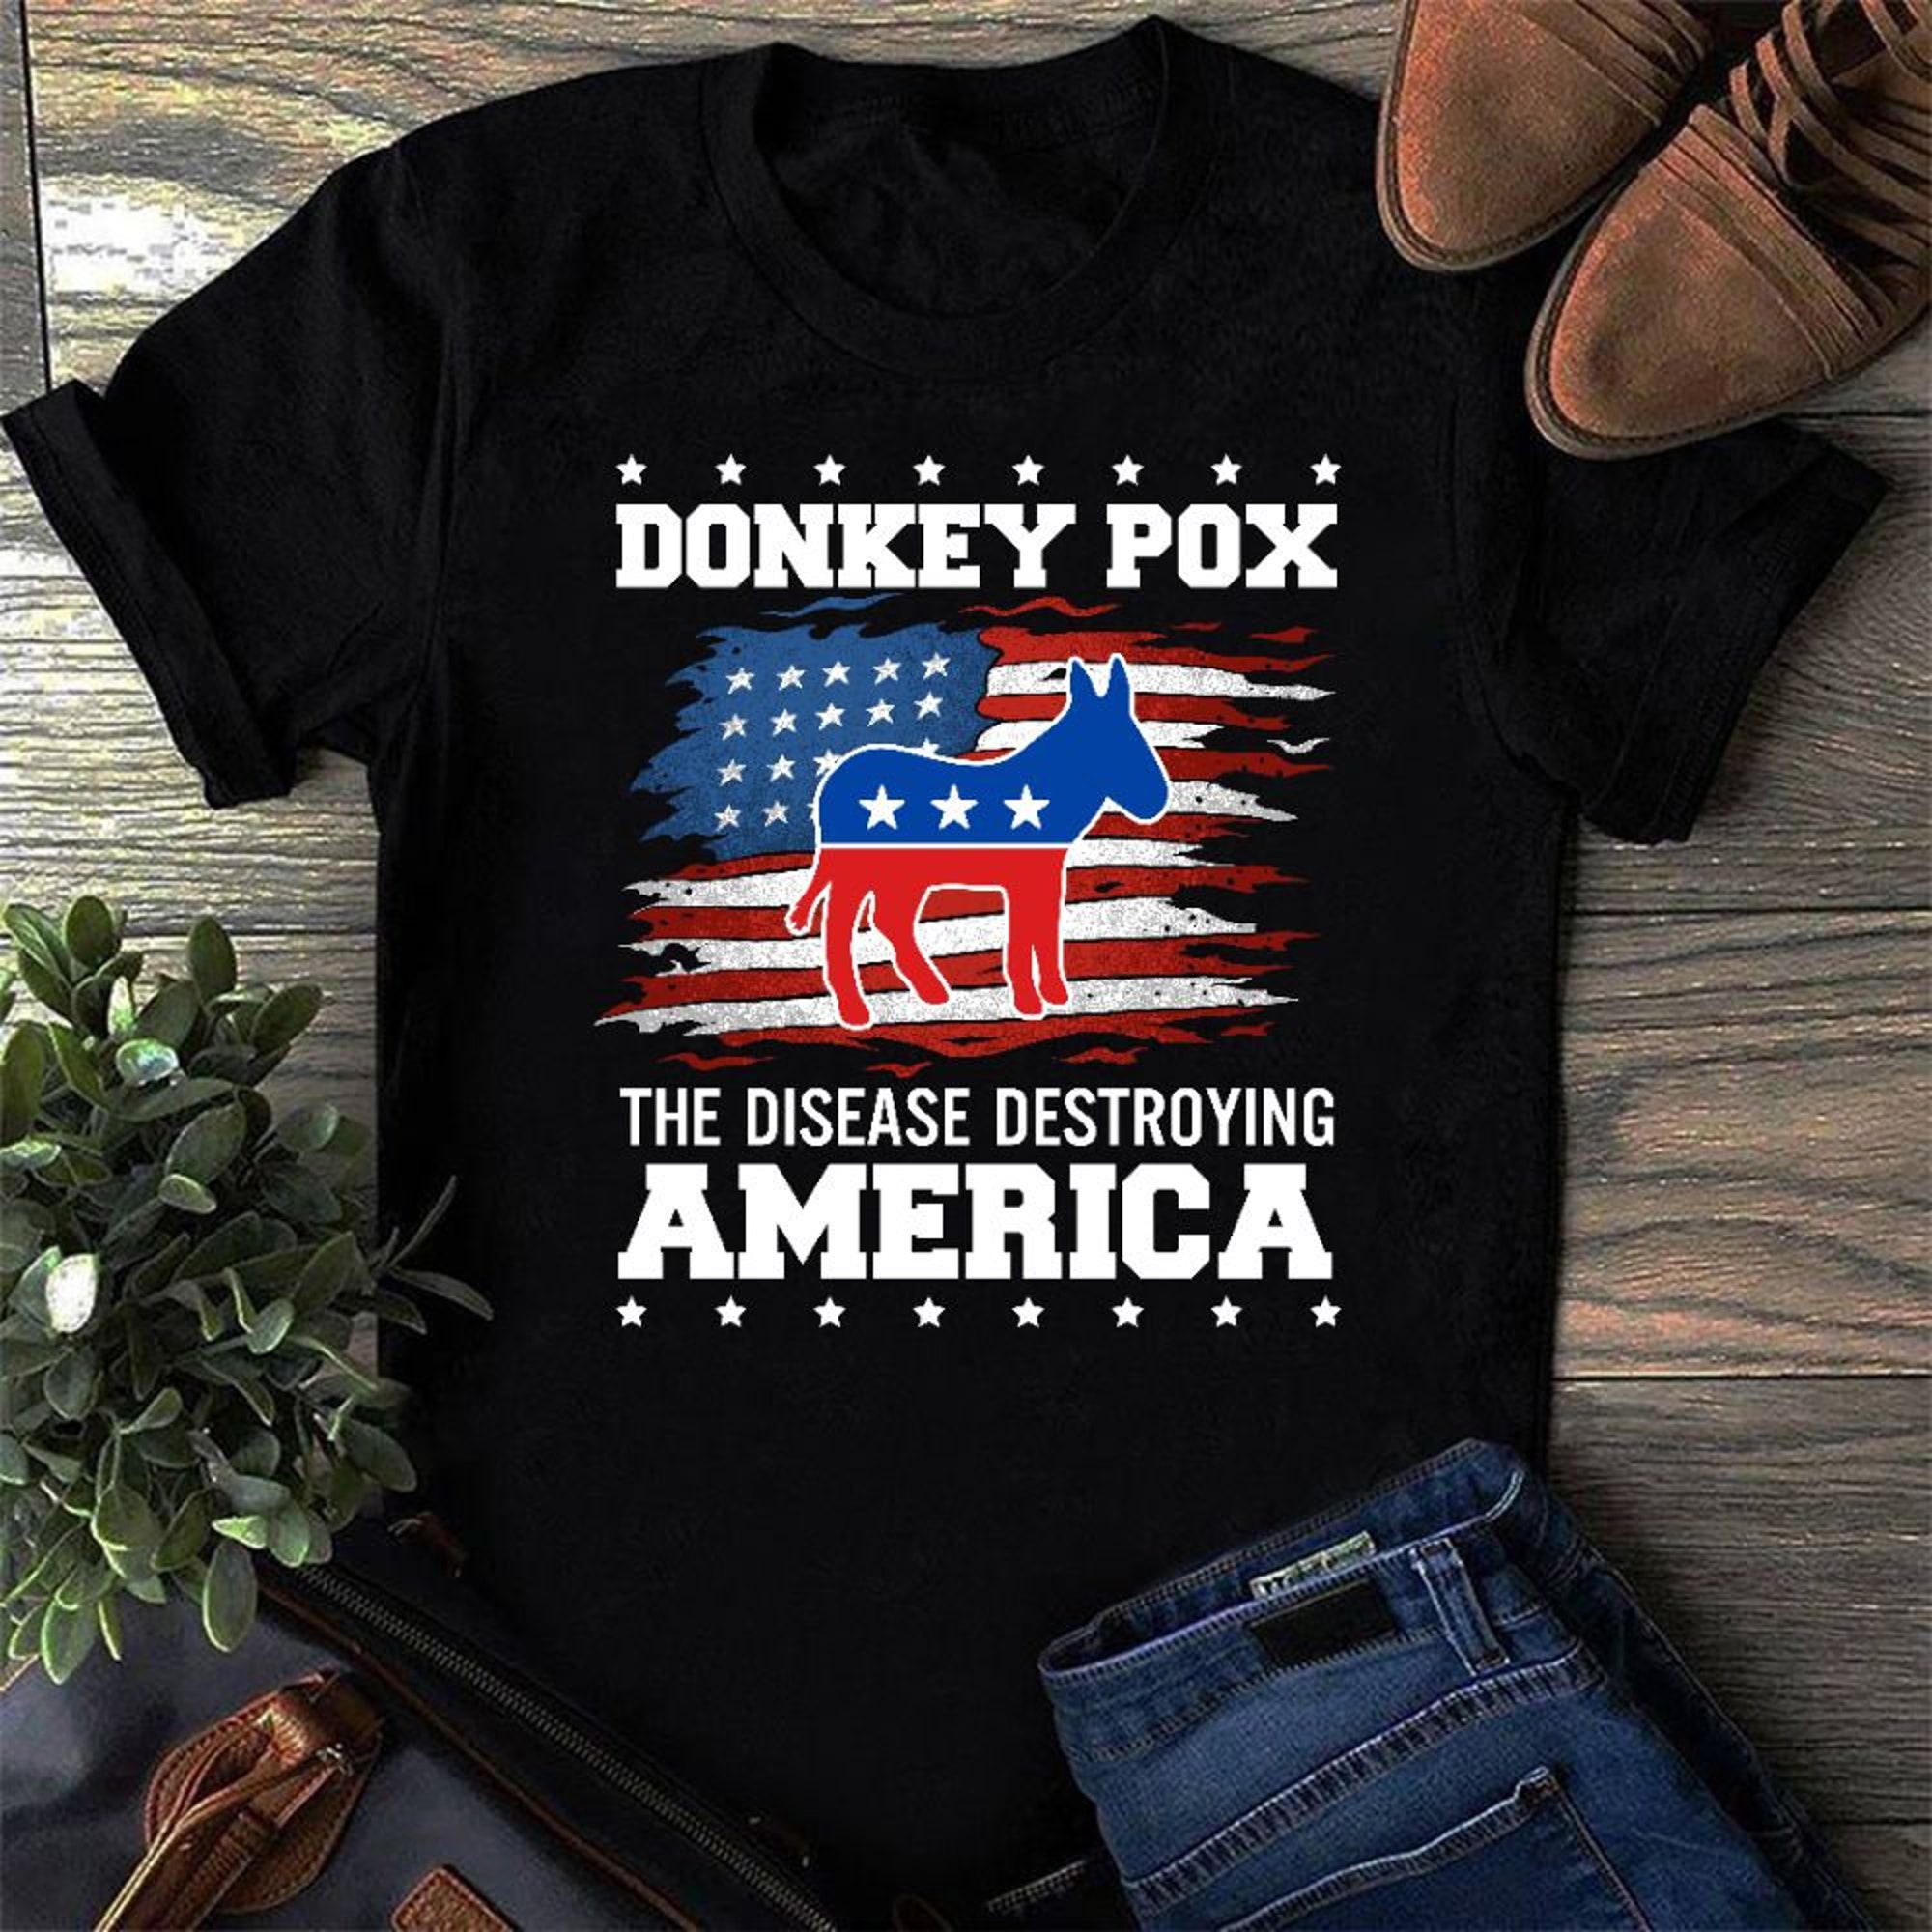 Discover Donkey Pox The Disease Destroying America Shirt